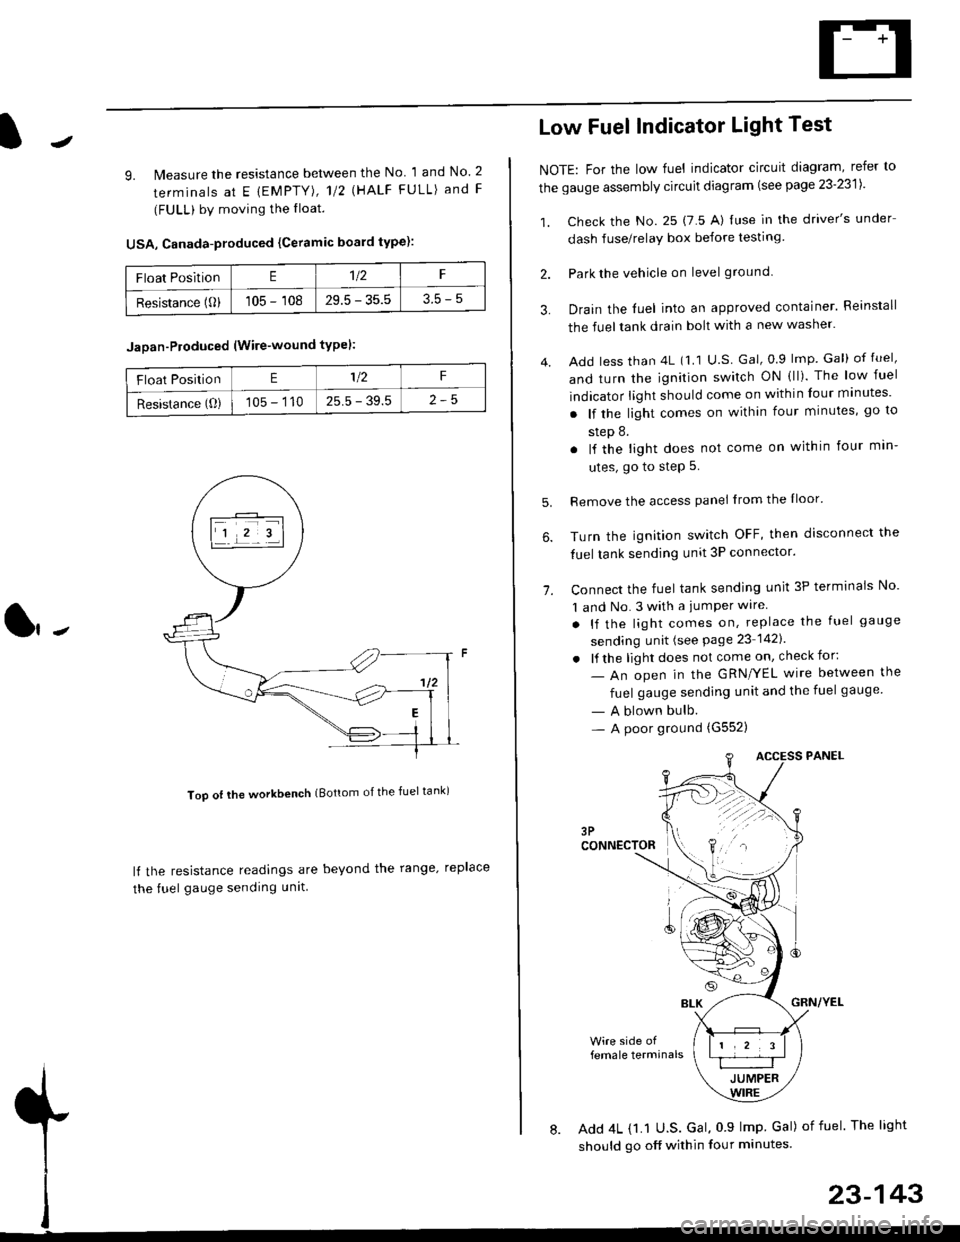 HONDA CIVIC 1997 6.G Workshop Manual J
9. lMeasure the resistance between the No 1 and No. 2
terminals at E {EMPTY), 112 \HALF FULL) and F
(FULL) by moving the lloat.
USA, Canada-produced {Ceramic board type):
Too ot lhe workbench (Botto